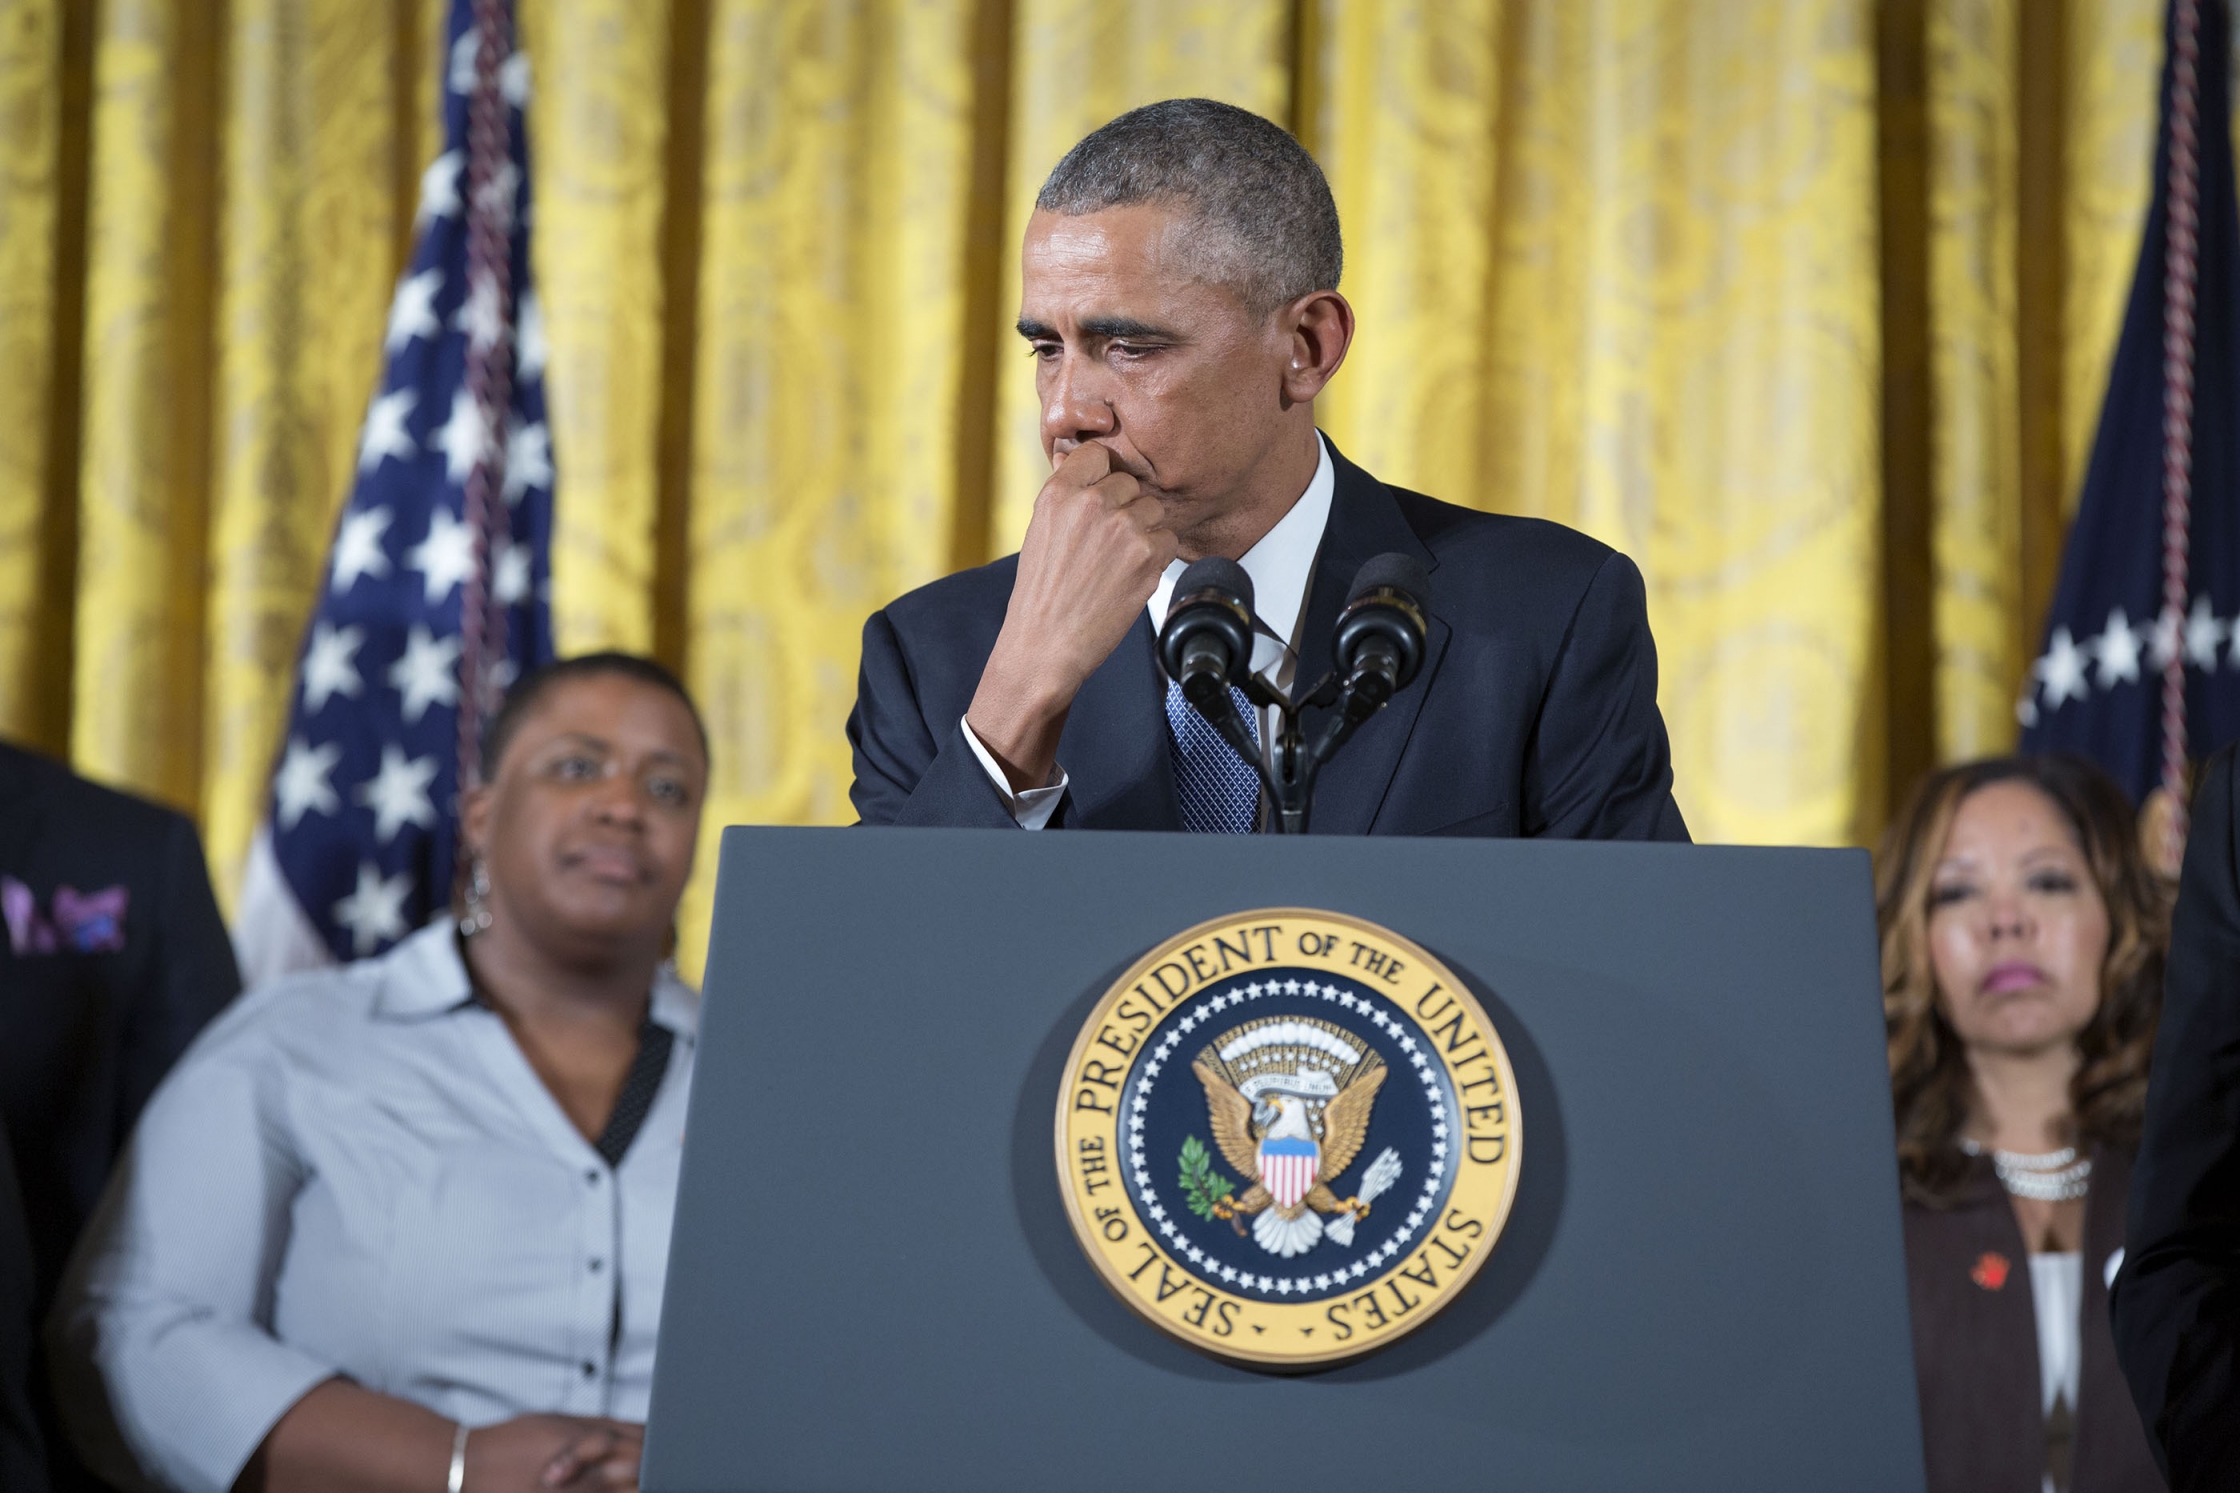 President Obama tears up at his press conference